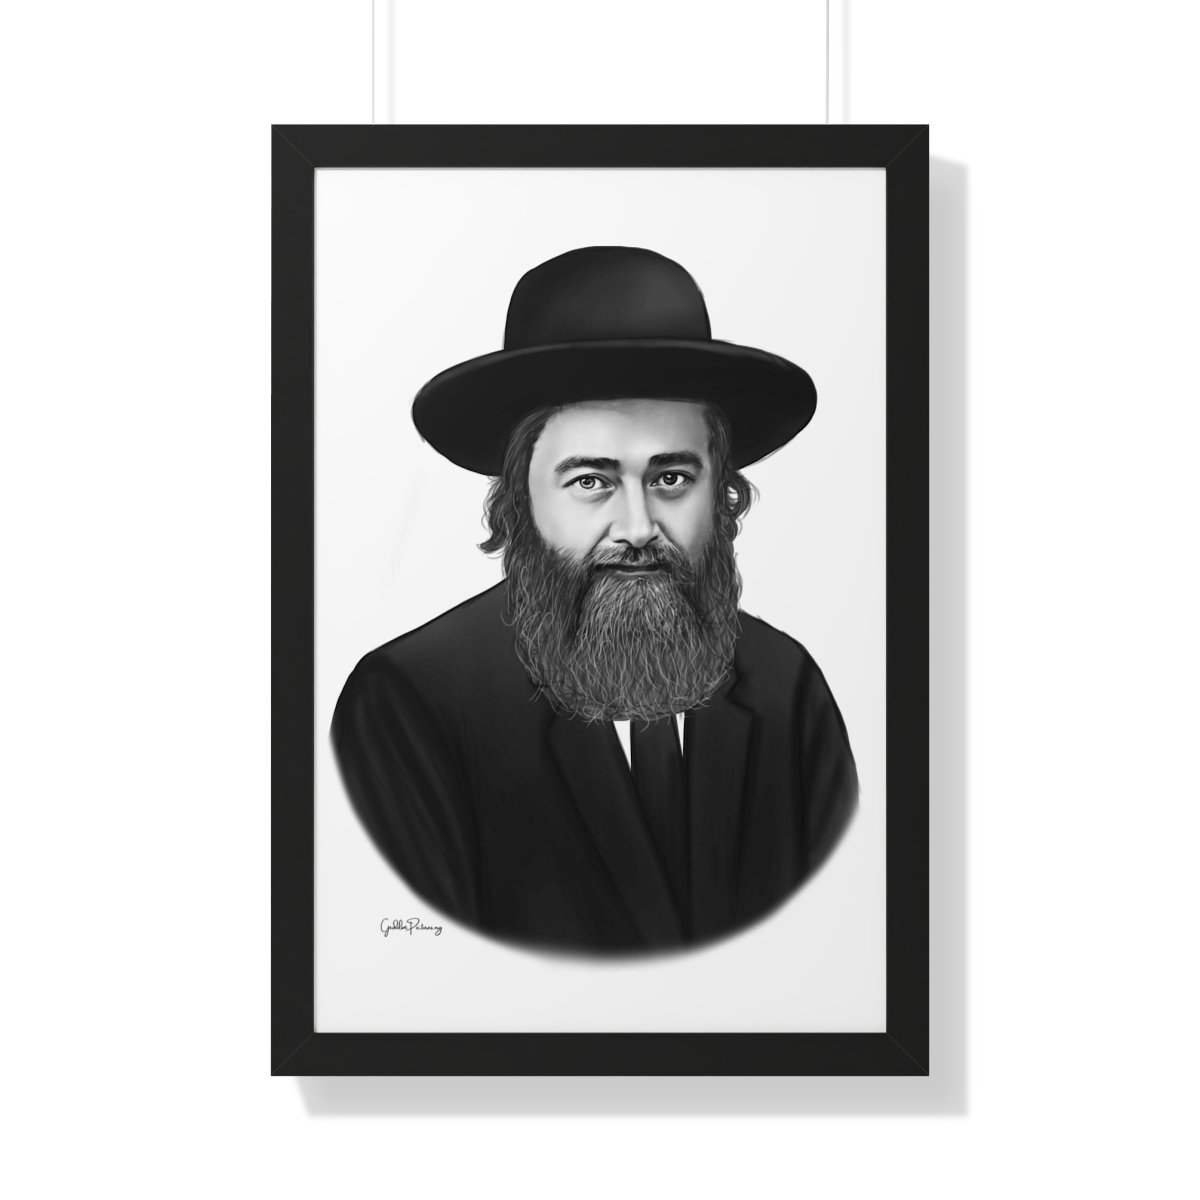 69669 30 - Gedolim Pictures